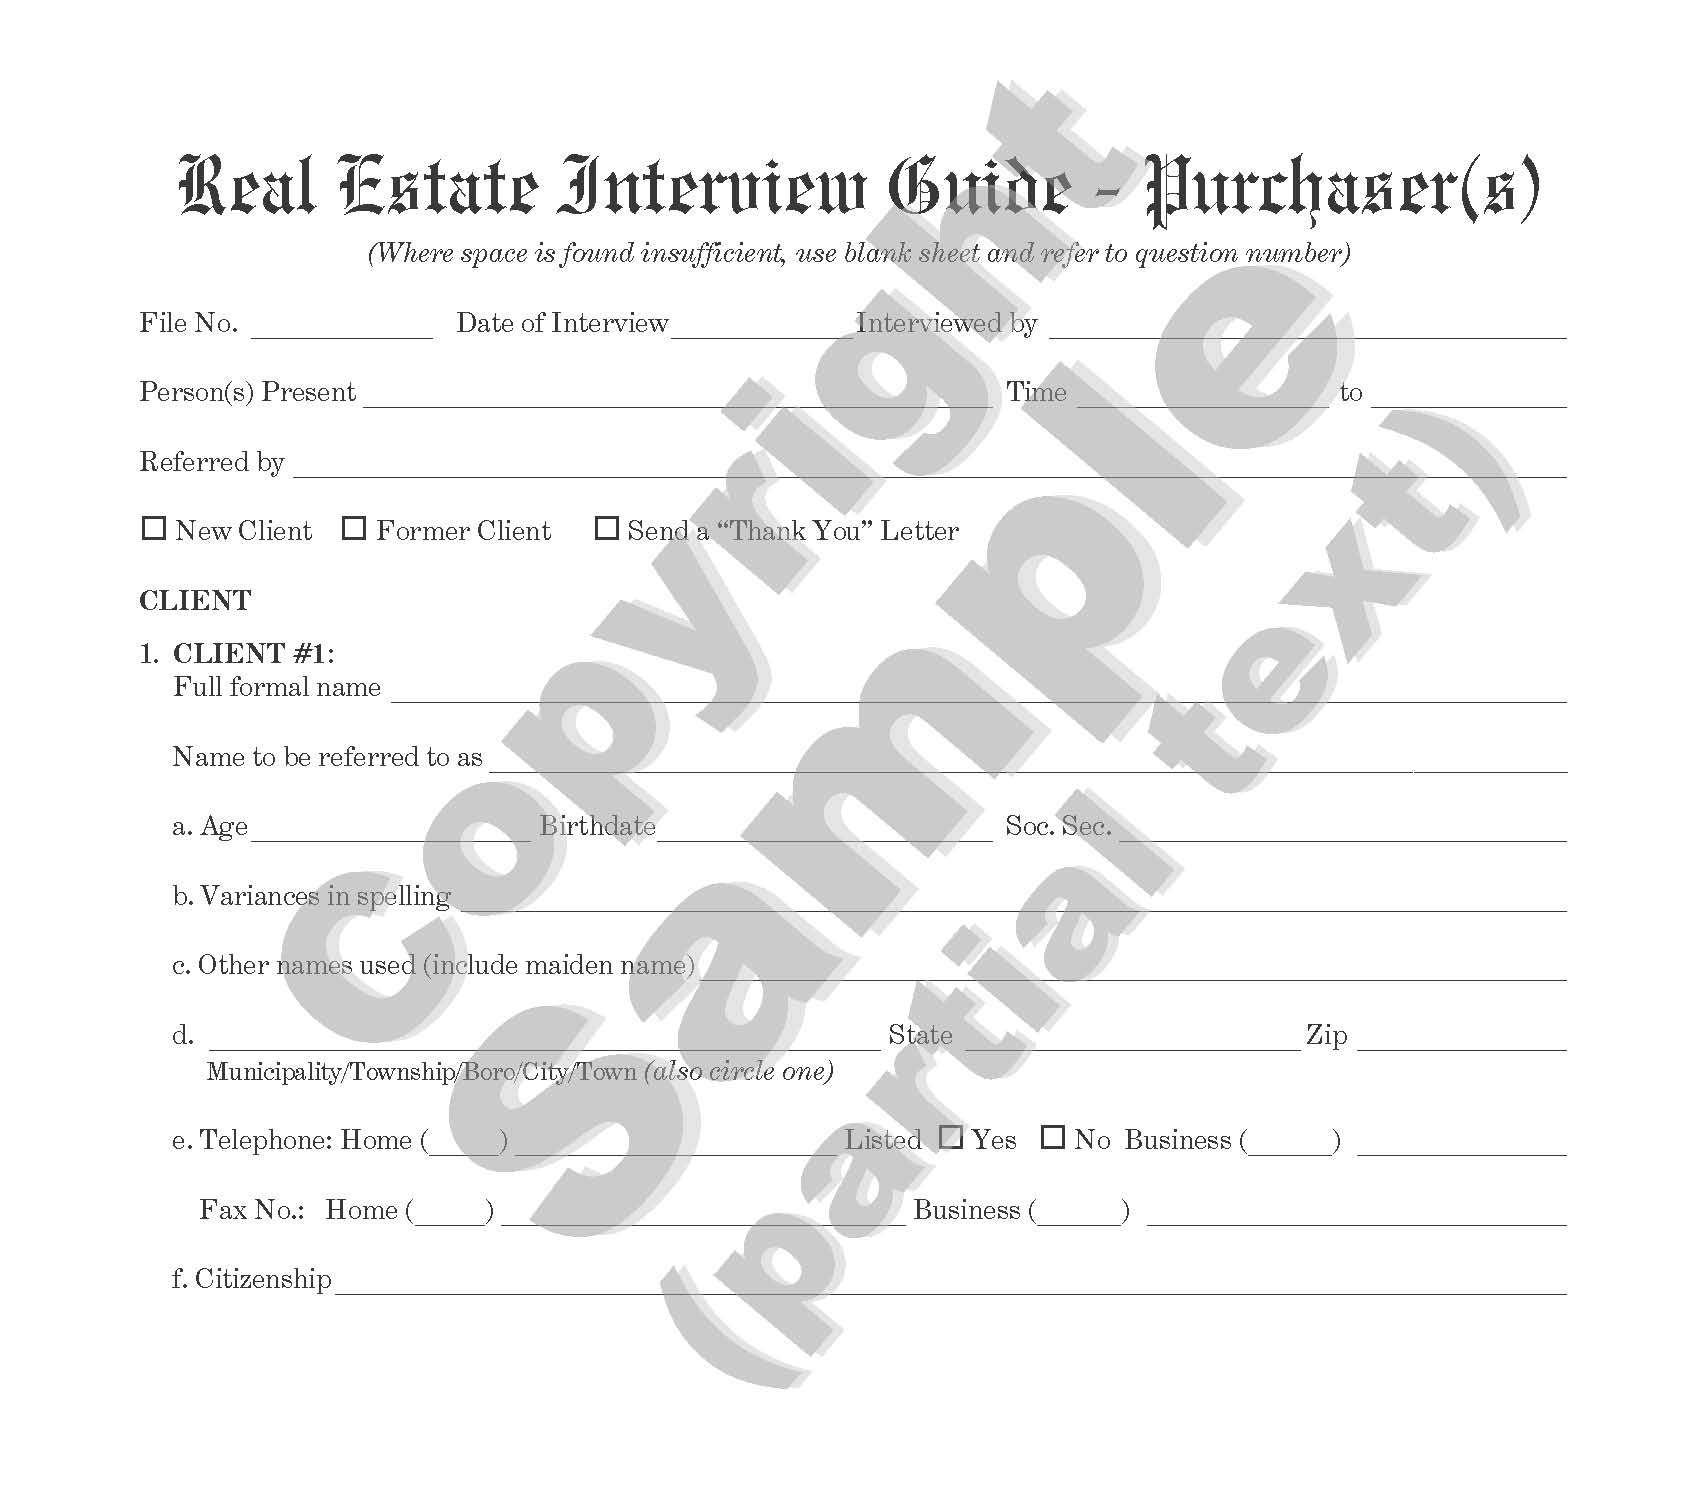 Real Estate Interview Guide to be Used for a Purchaser